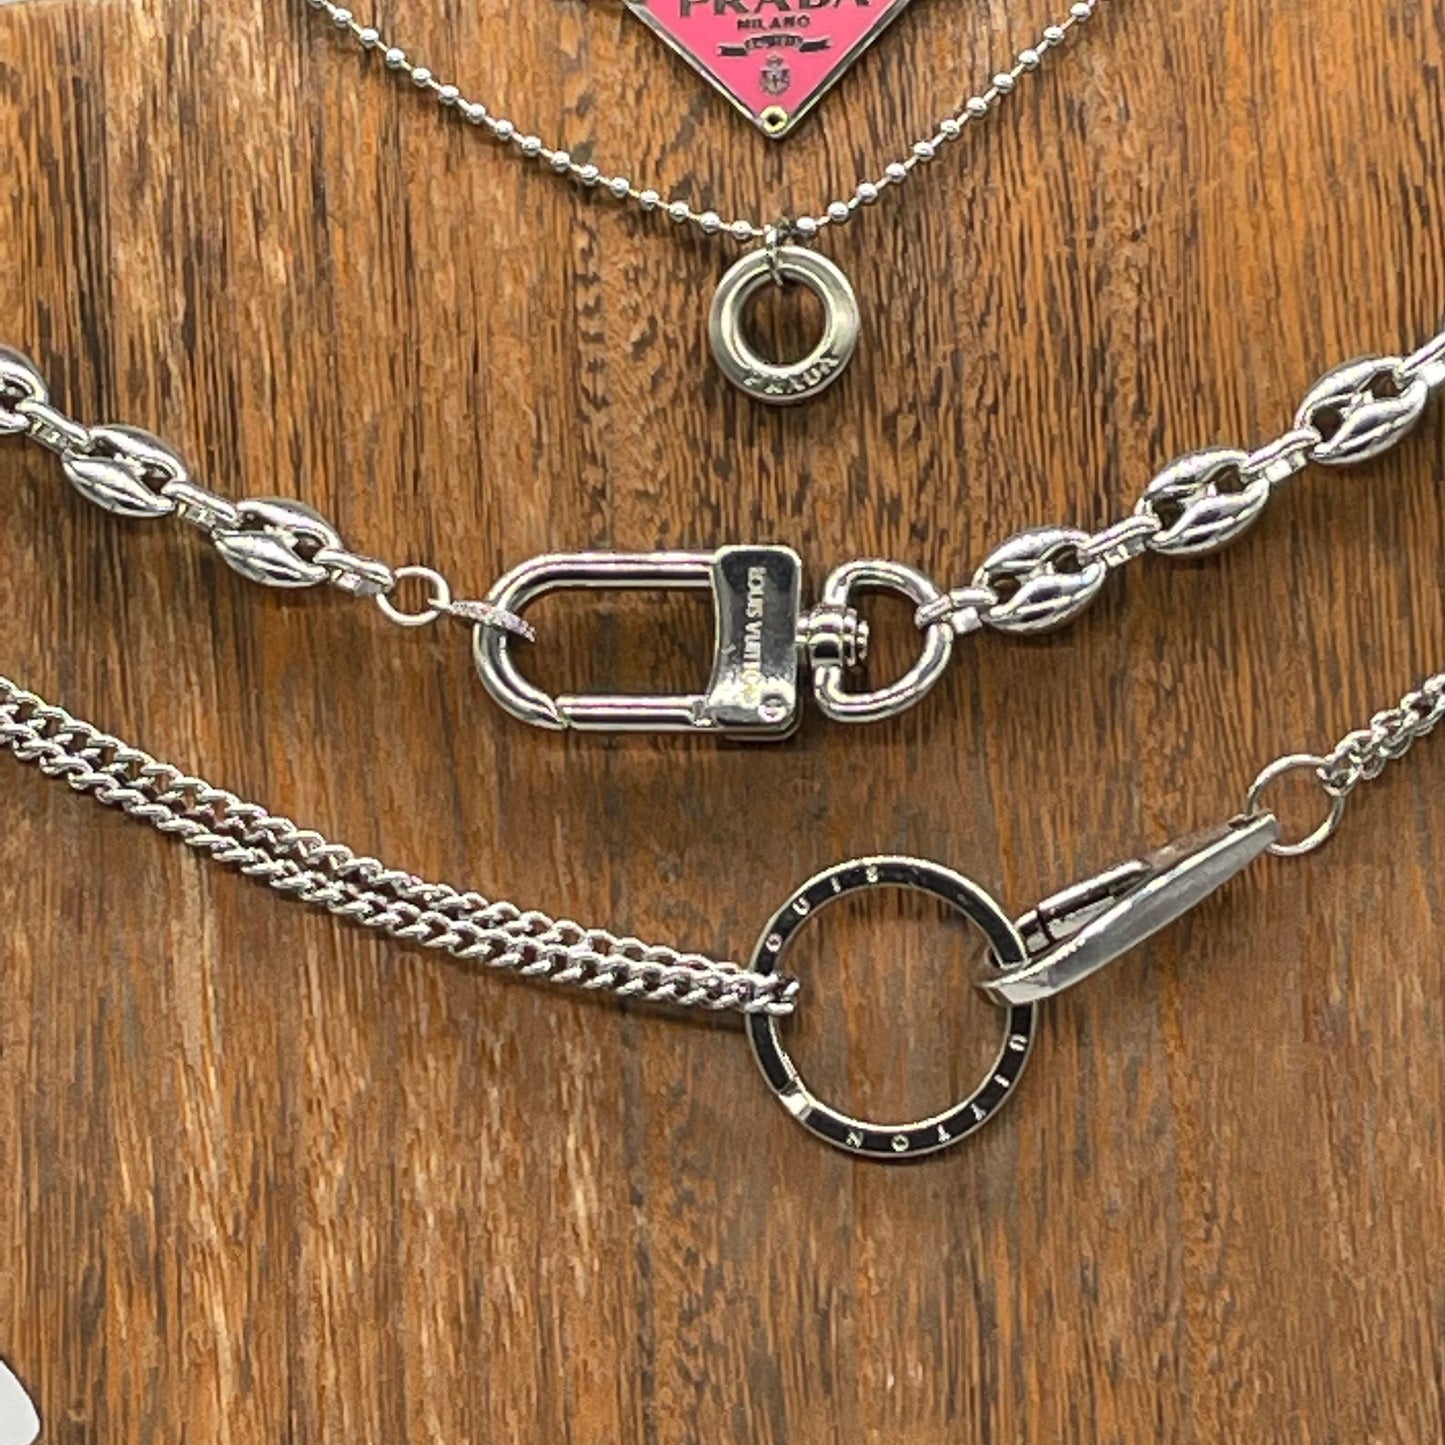 Statement Necklace on One of a Kind Louis Vuitton Key Ring on Double Chain Choker